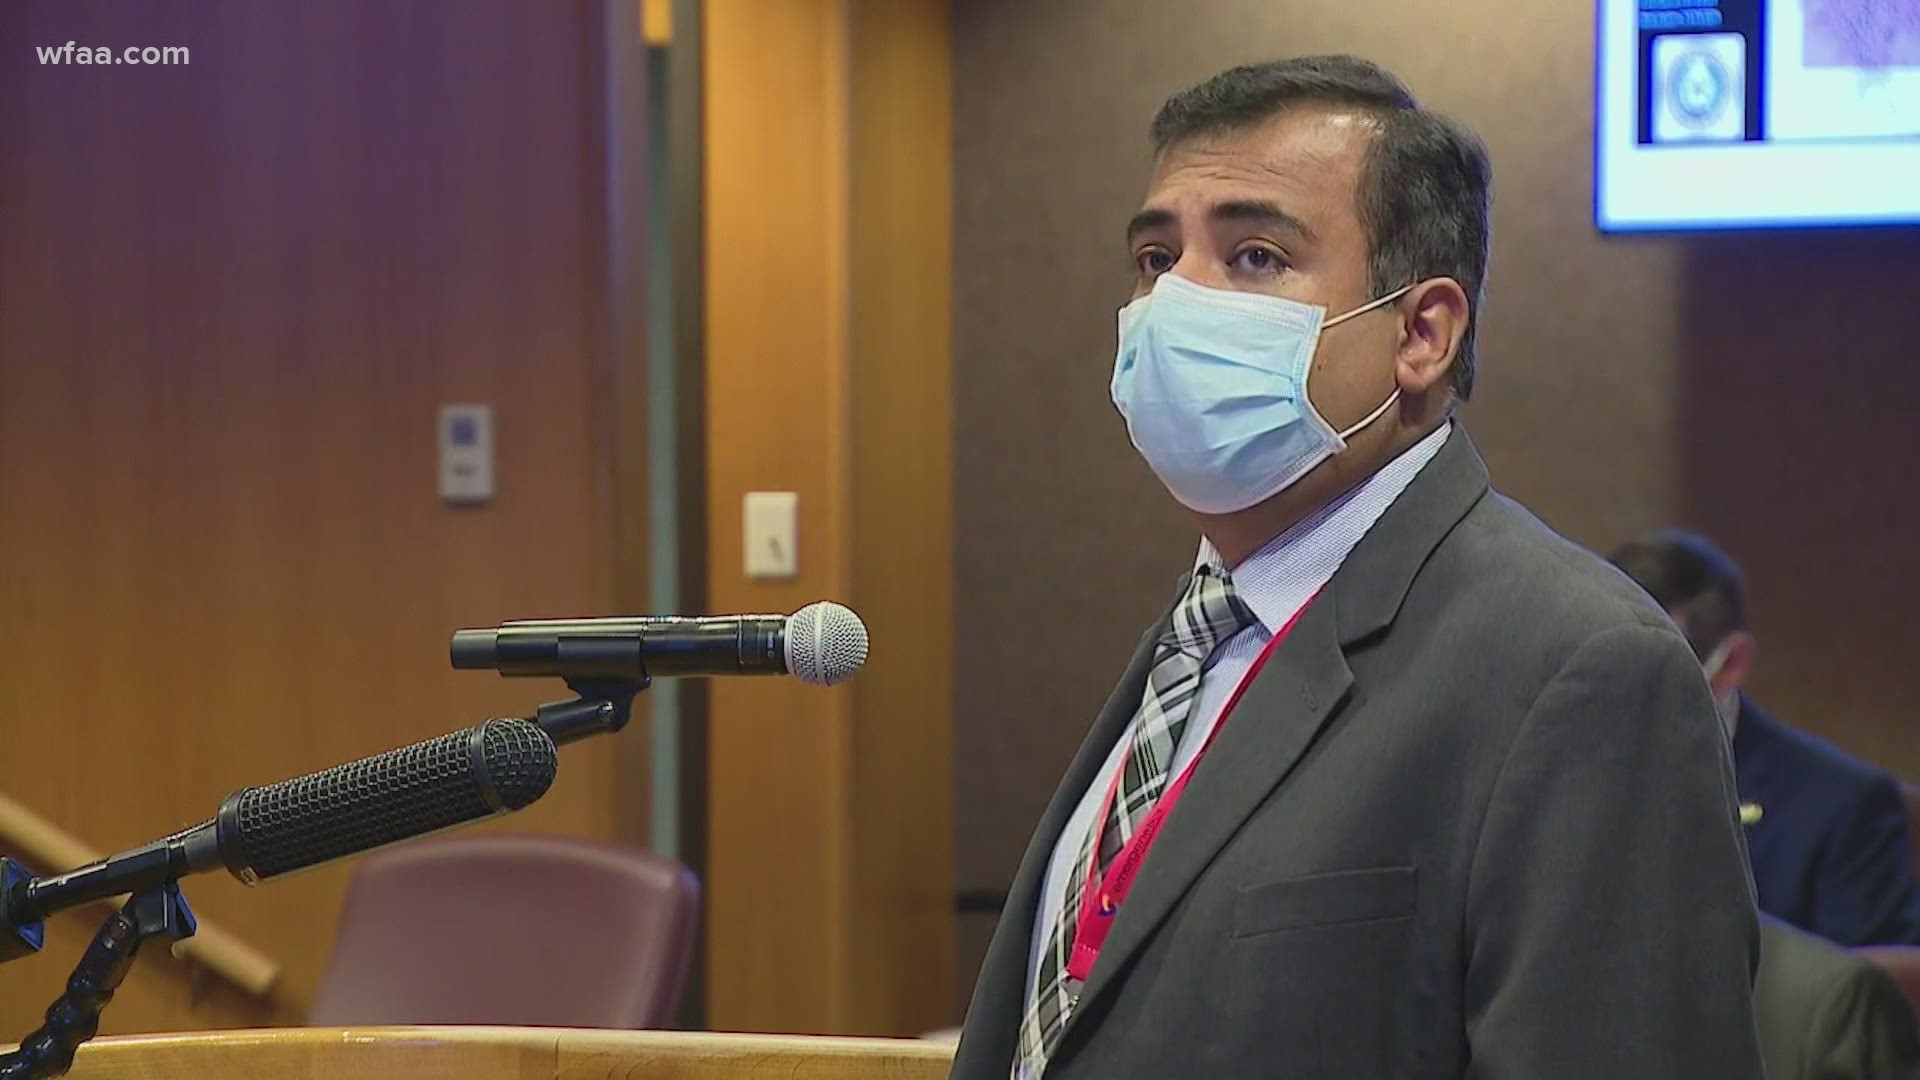 Public Health Director Vinny Taneja said due to the rising cases, hospitalization rates, and positivity rates, Tarrant County schools should consider this change.